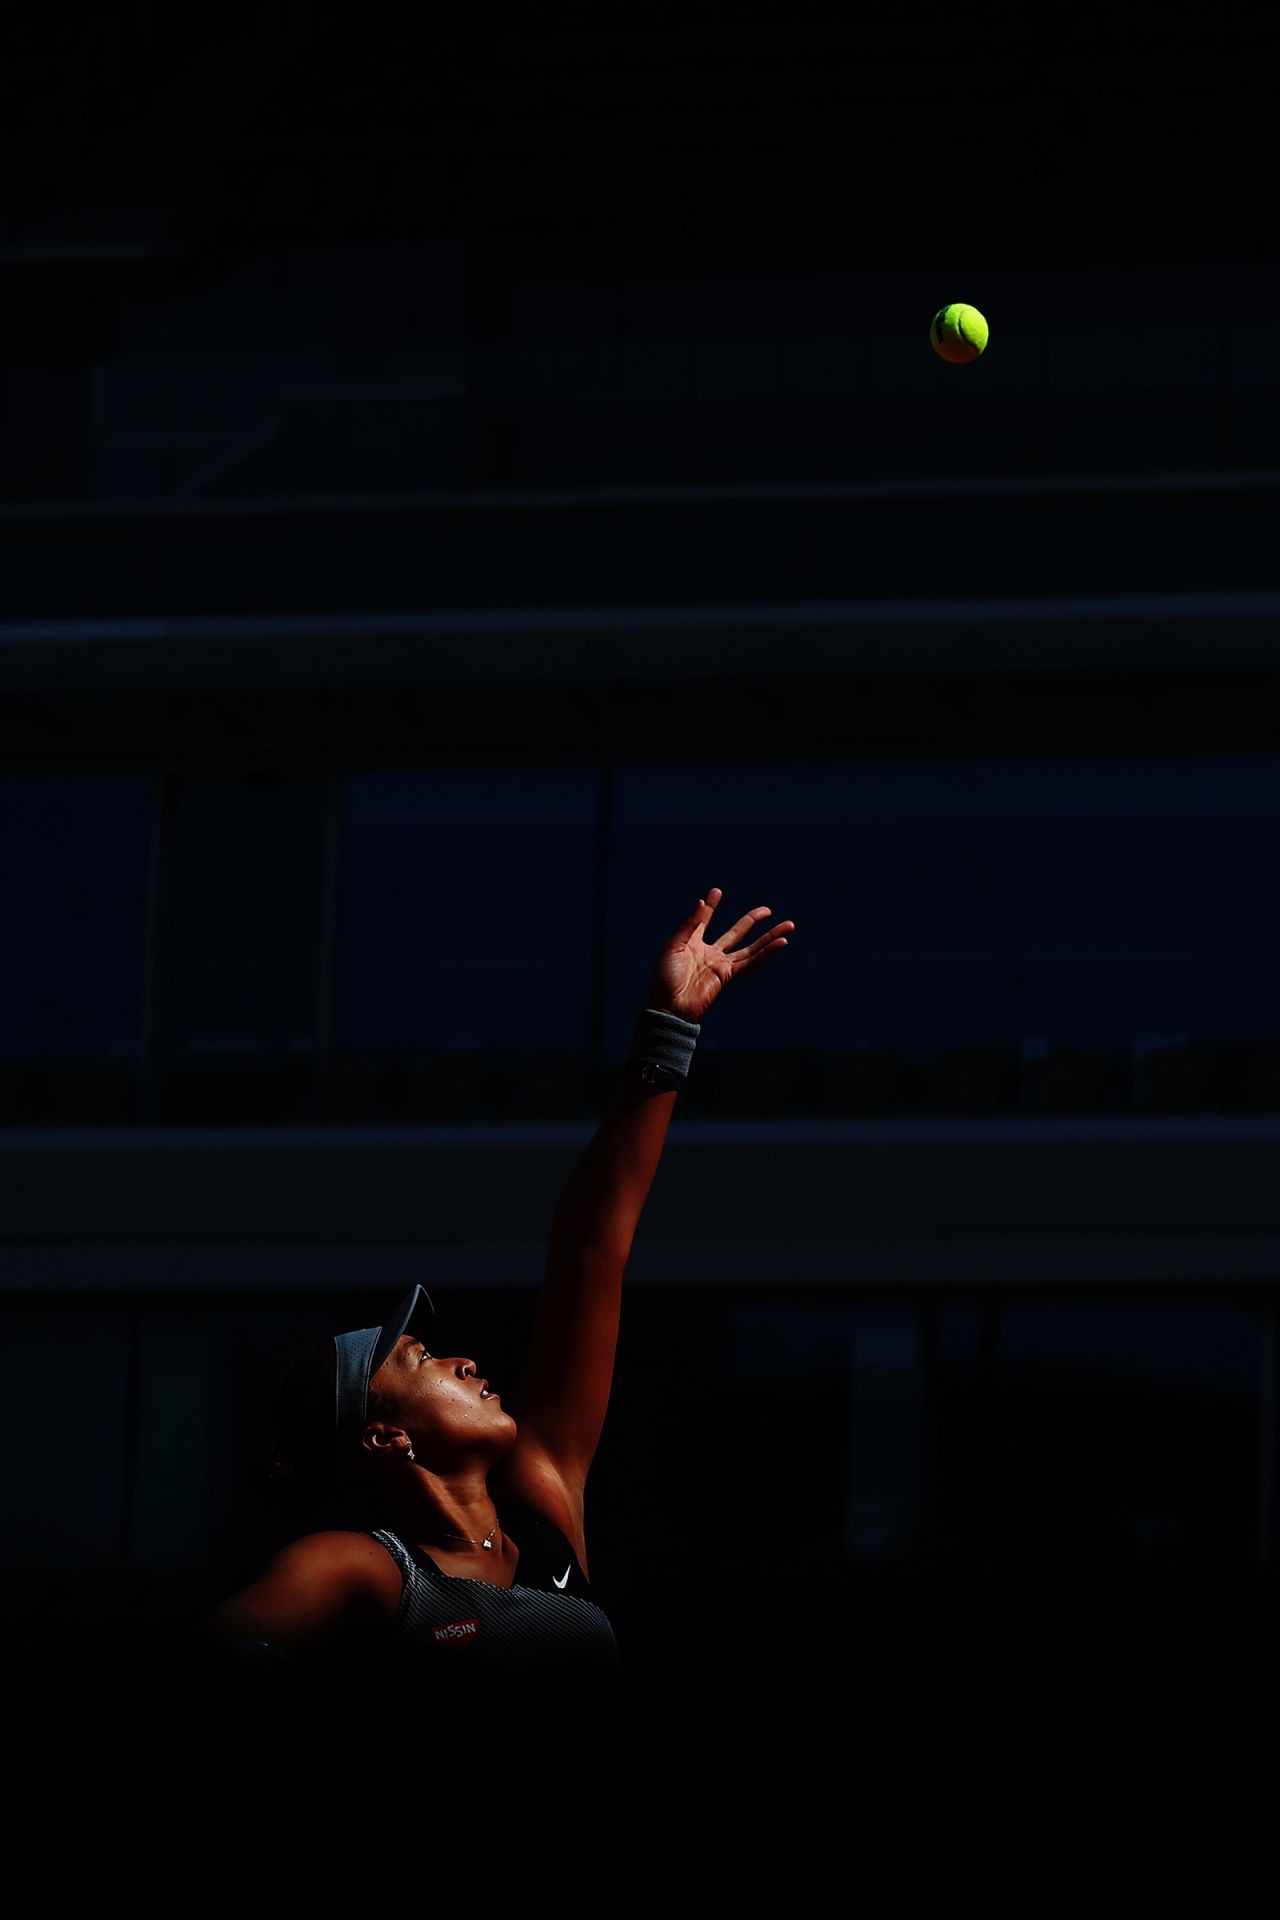 Naomi Osaka serves during her first-round win at the French Open on Sunday, May 30. A day later, the tennis star <a href="https://www.cnn.com/2021/05/31/tennis/naomi-osaka-french-open-withdraw-spt-intl/index.html" target="_blank">withdrew from the tournament,</a> citing her mental health.